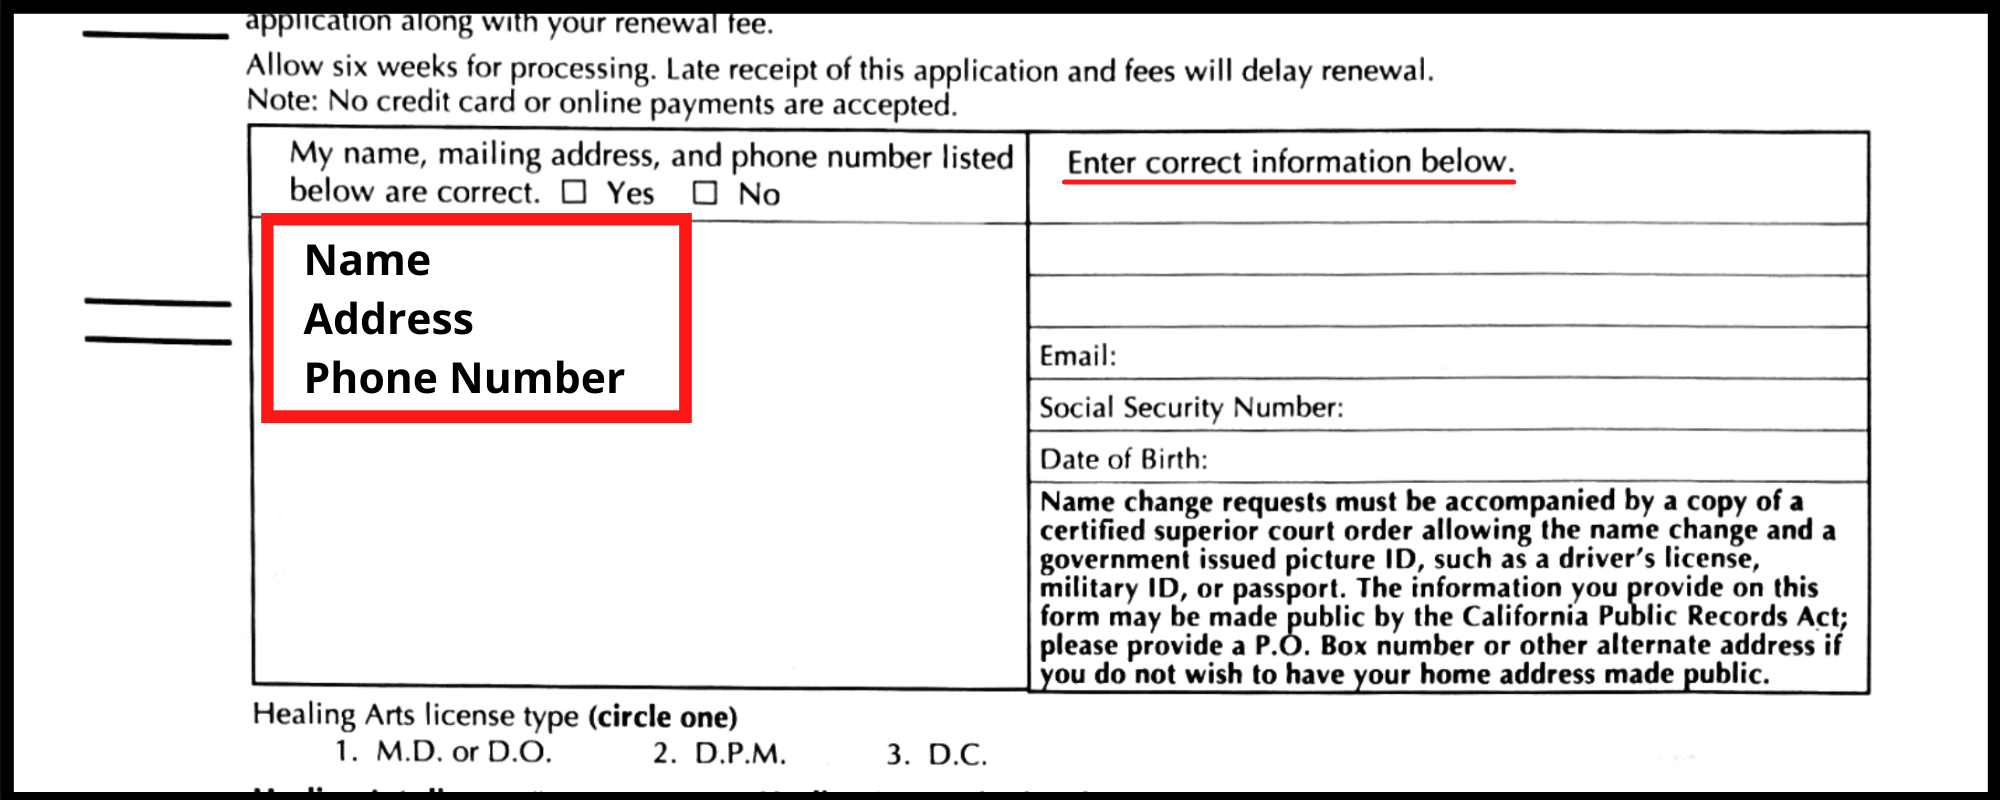 "Name, Address, Phone Number" listed in top left corner of sheet in red box. "Enter correct information below" underlined in red in the top right of the sheet